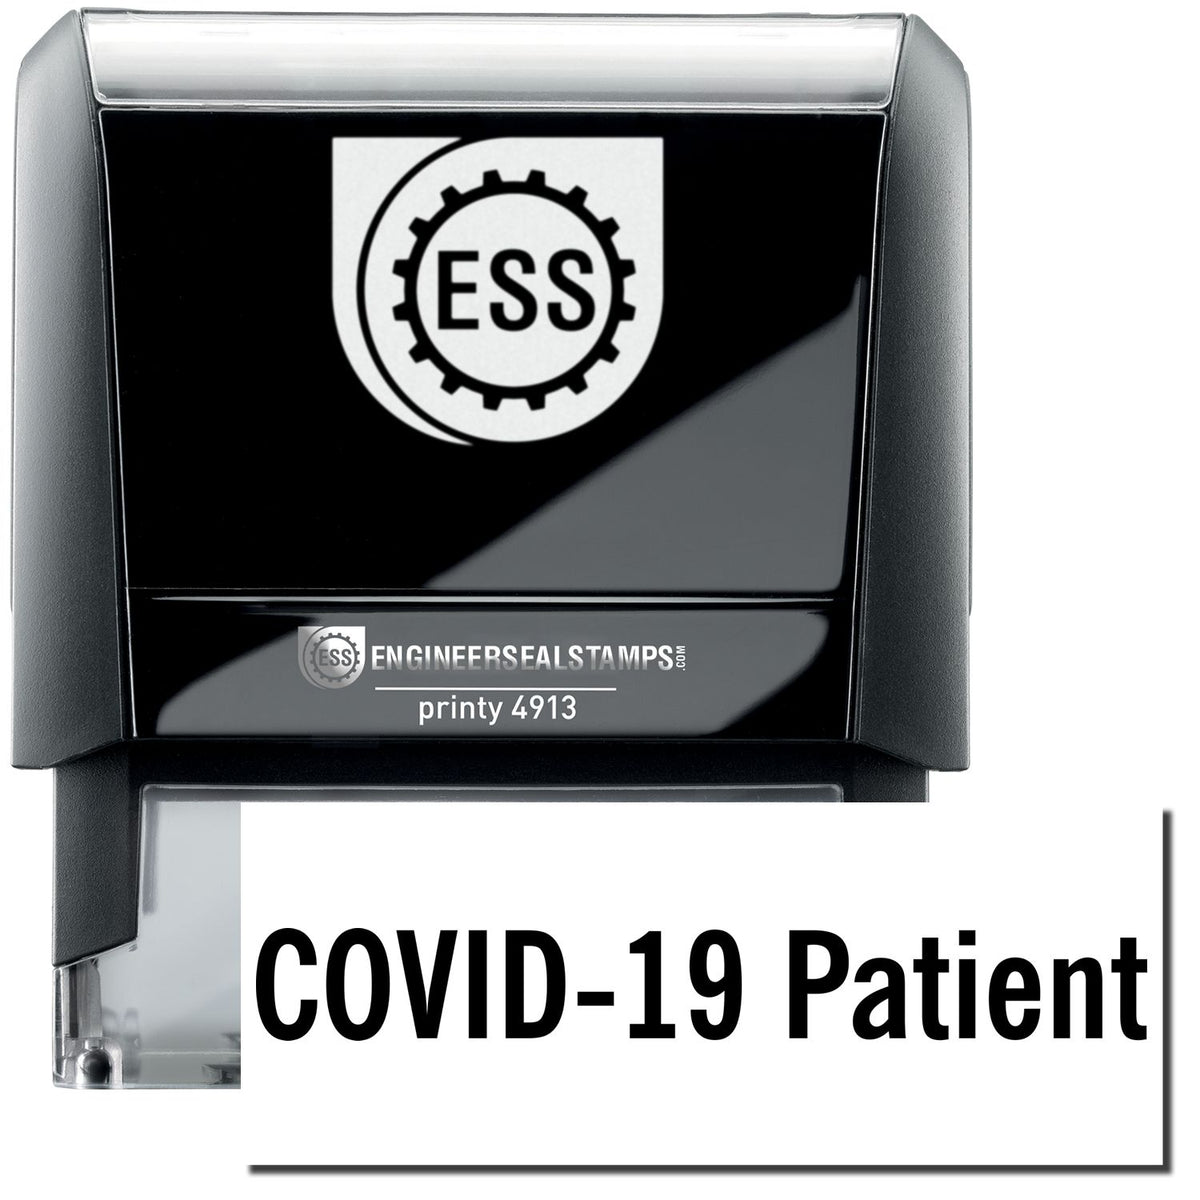 A self-inking stamp with a stamped image showing how the text &quot;COVID-19 Patient&quot; in a large font is displayed by it after stamping.